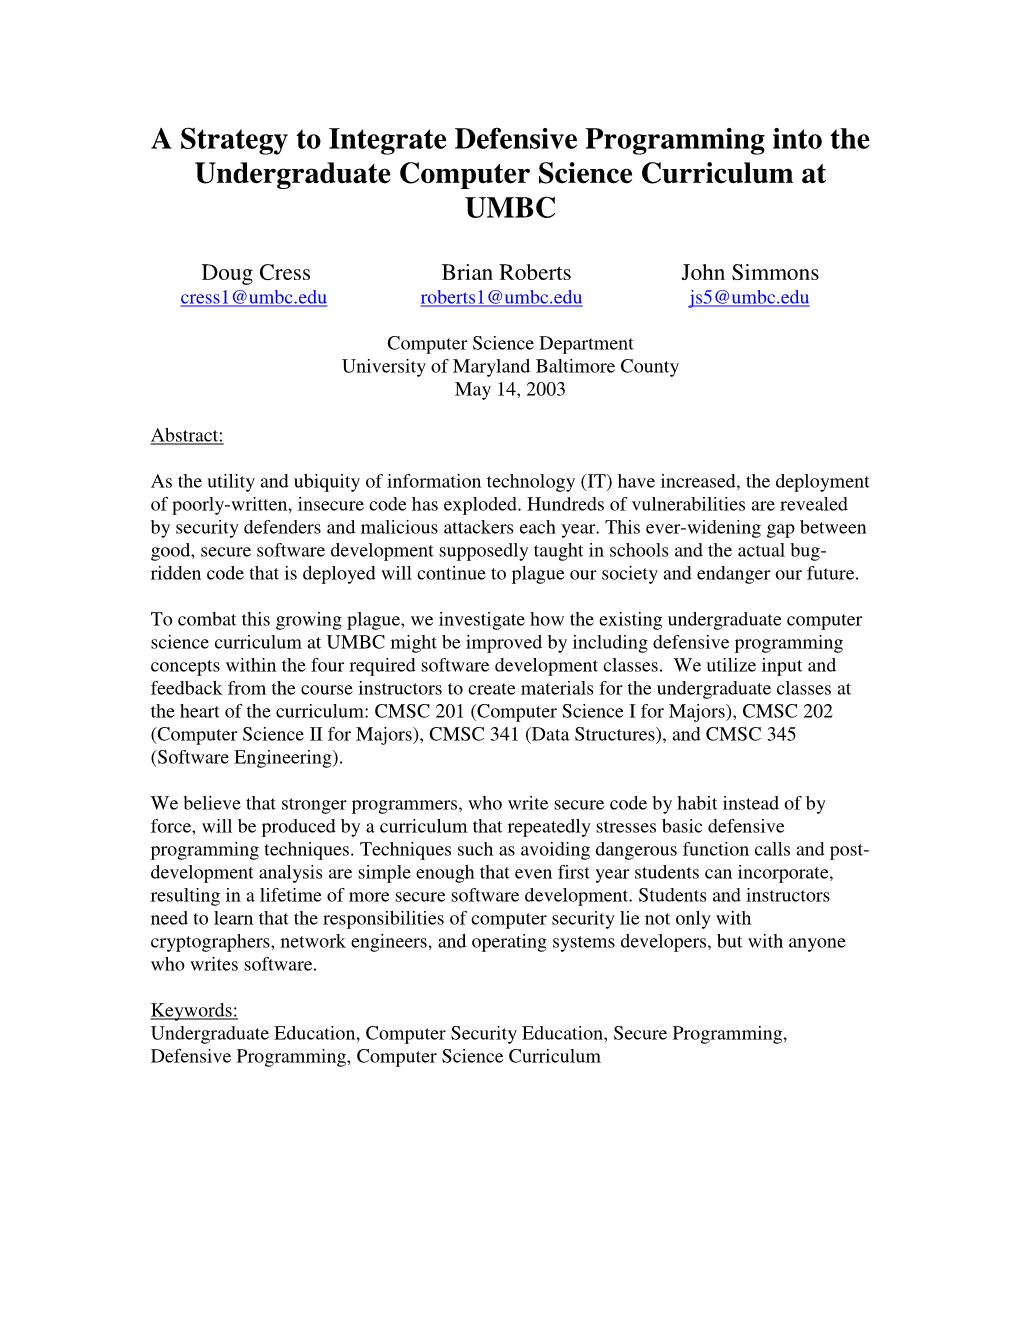 A Strategy to Integrate Defensive Programming Into the Undergraduate Computer Science Curriculum at UMBC